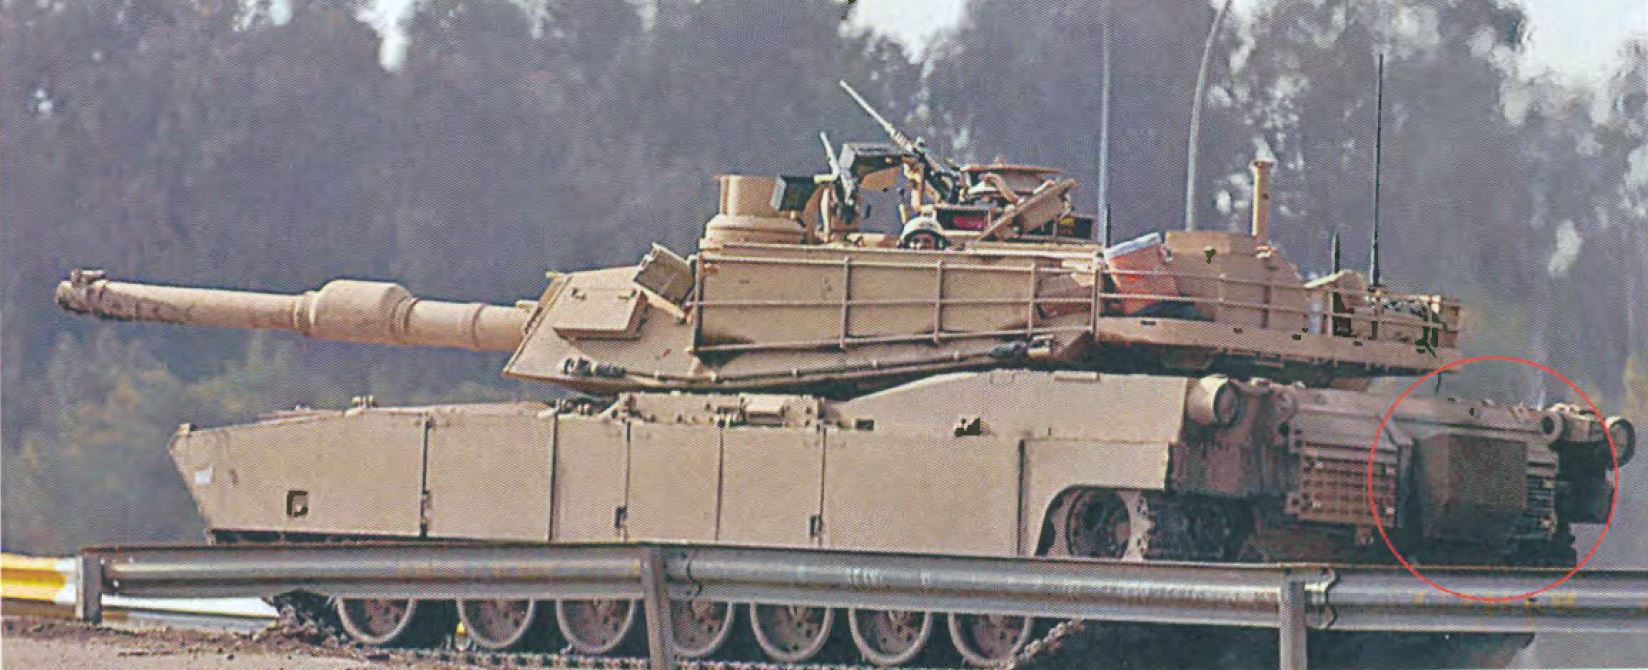 Image of M1 tank with exhaust deflector